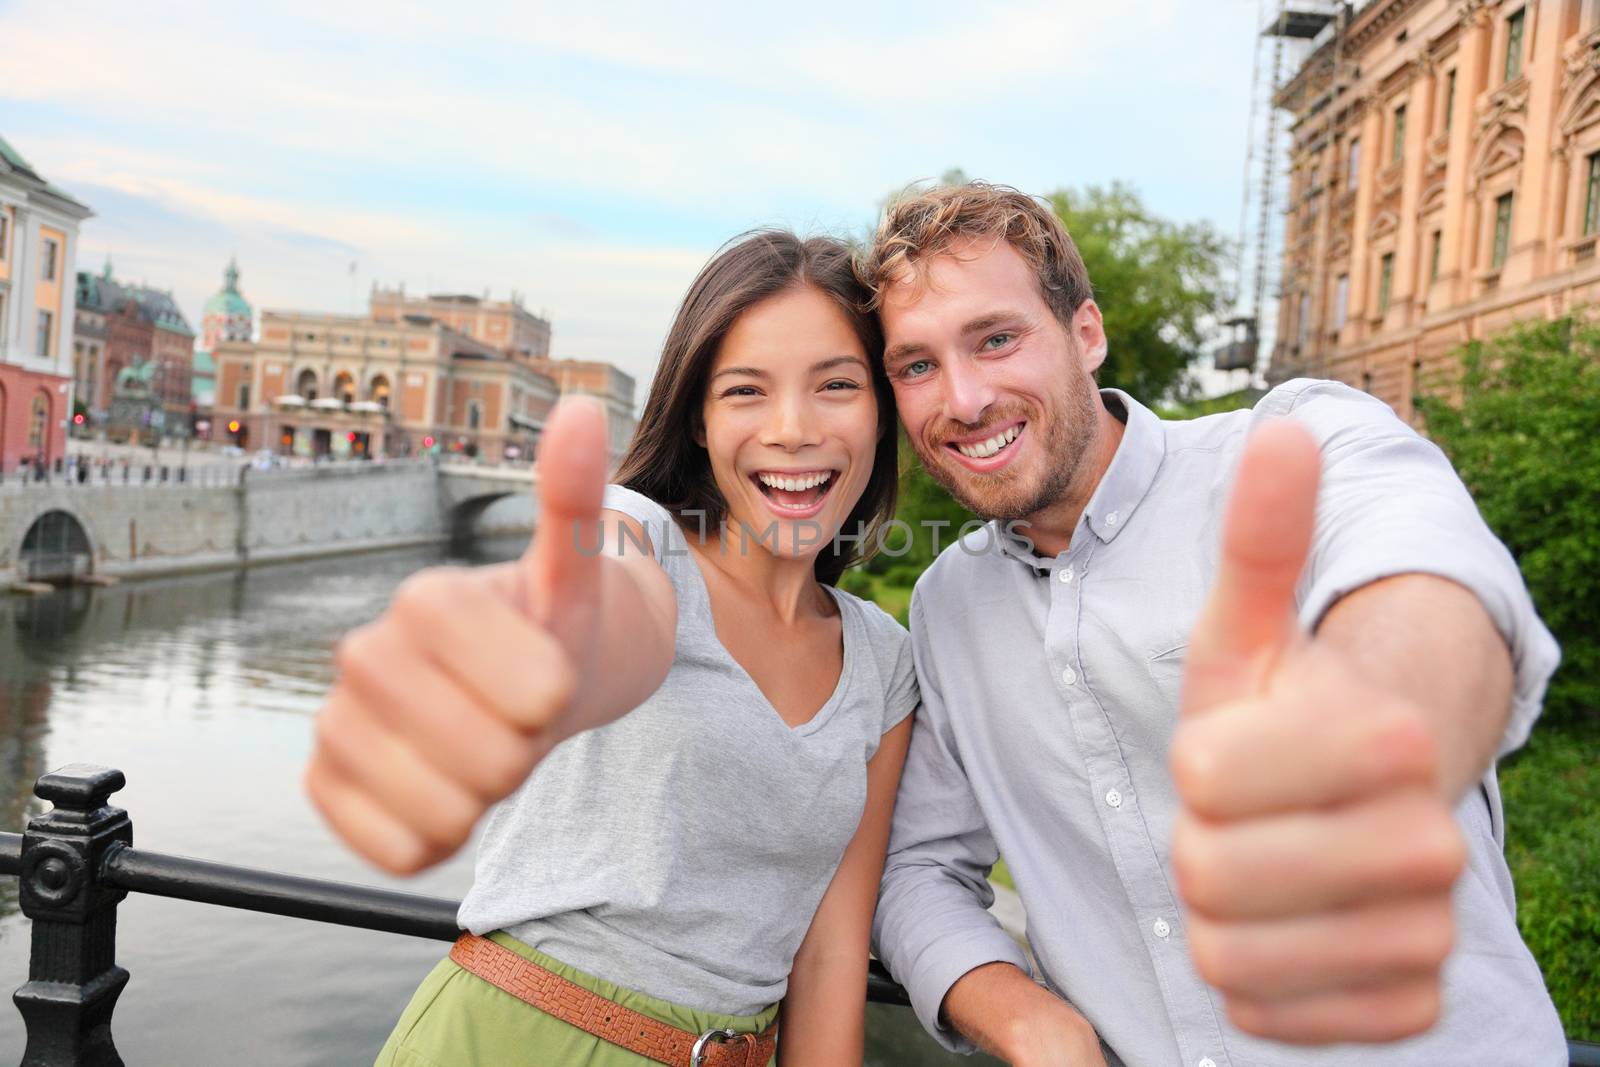 Thumbs up couple happy in Stockholm, Sweden by Maridav